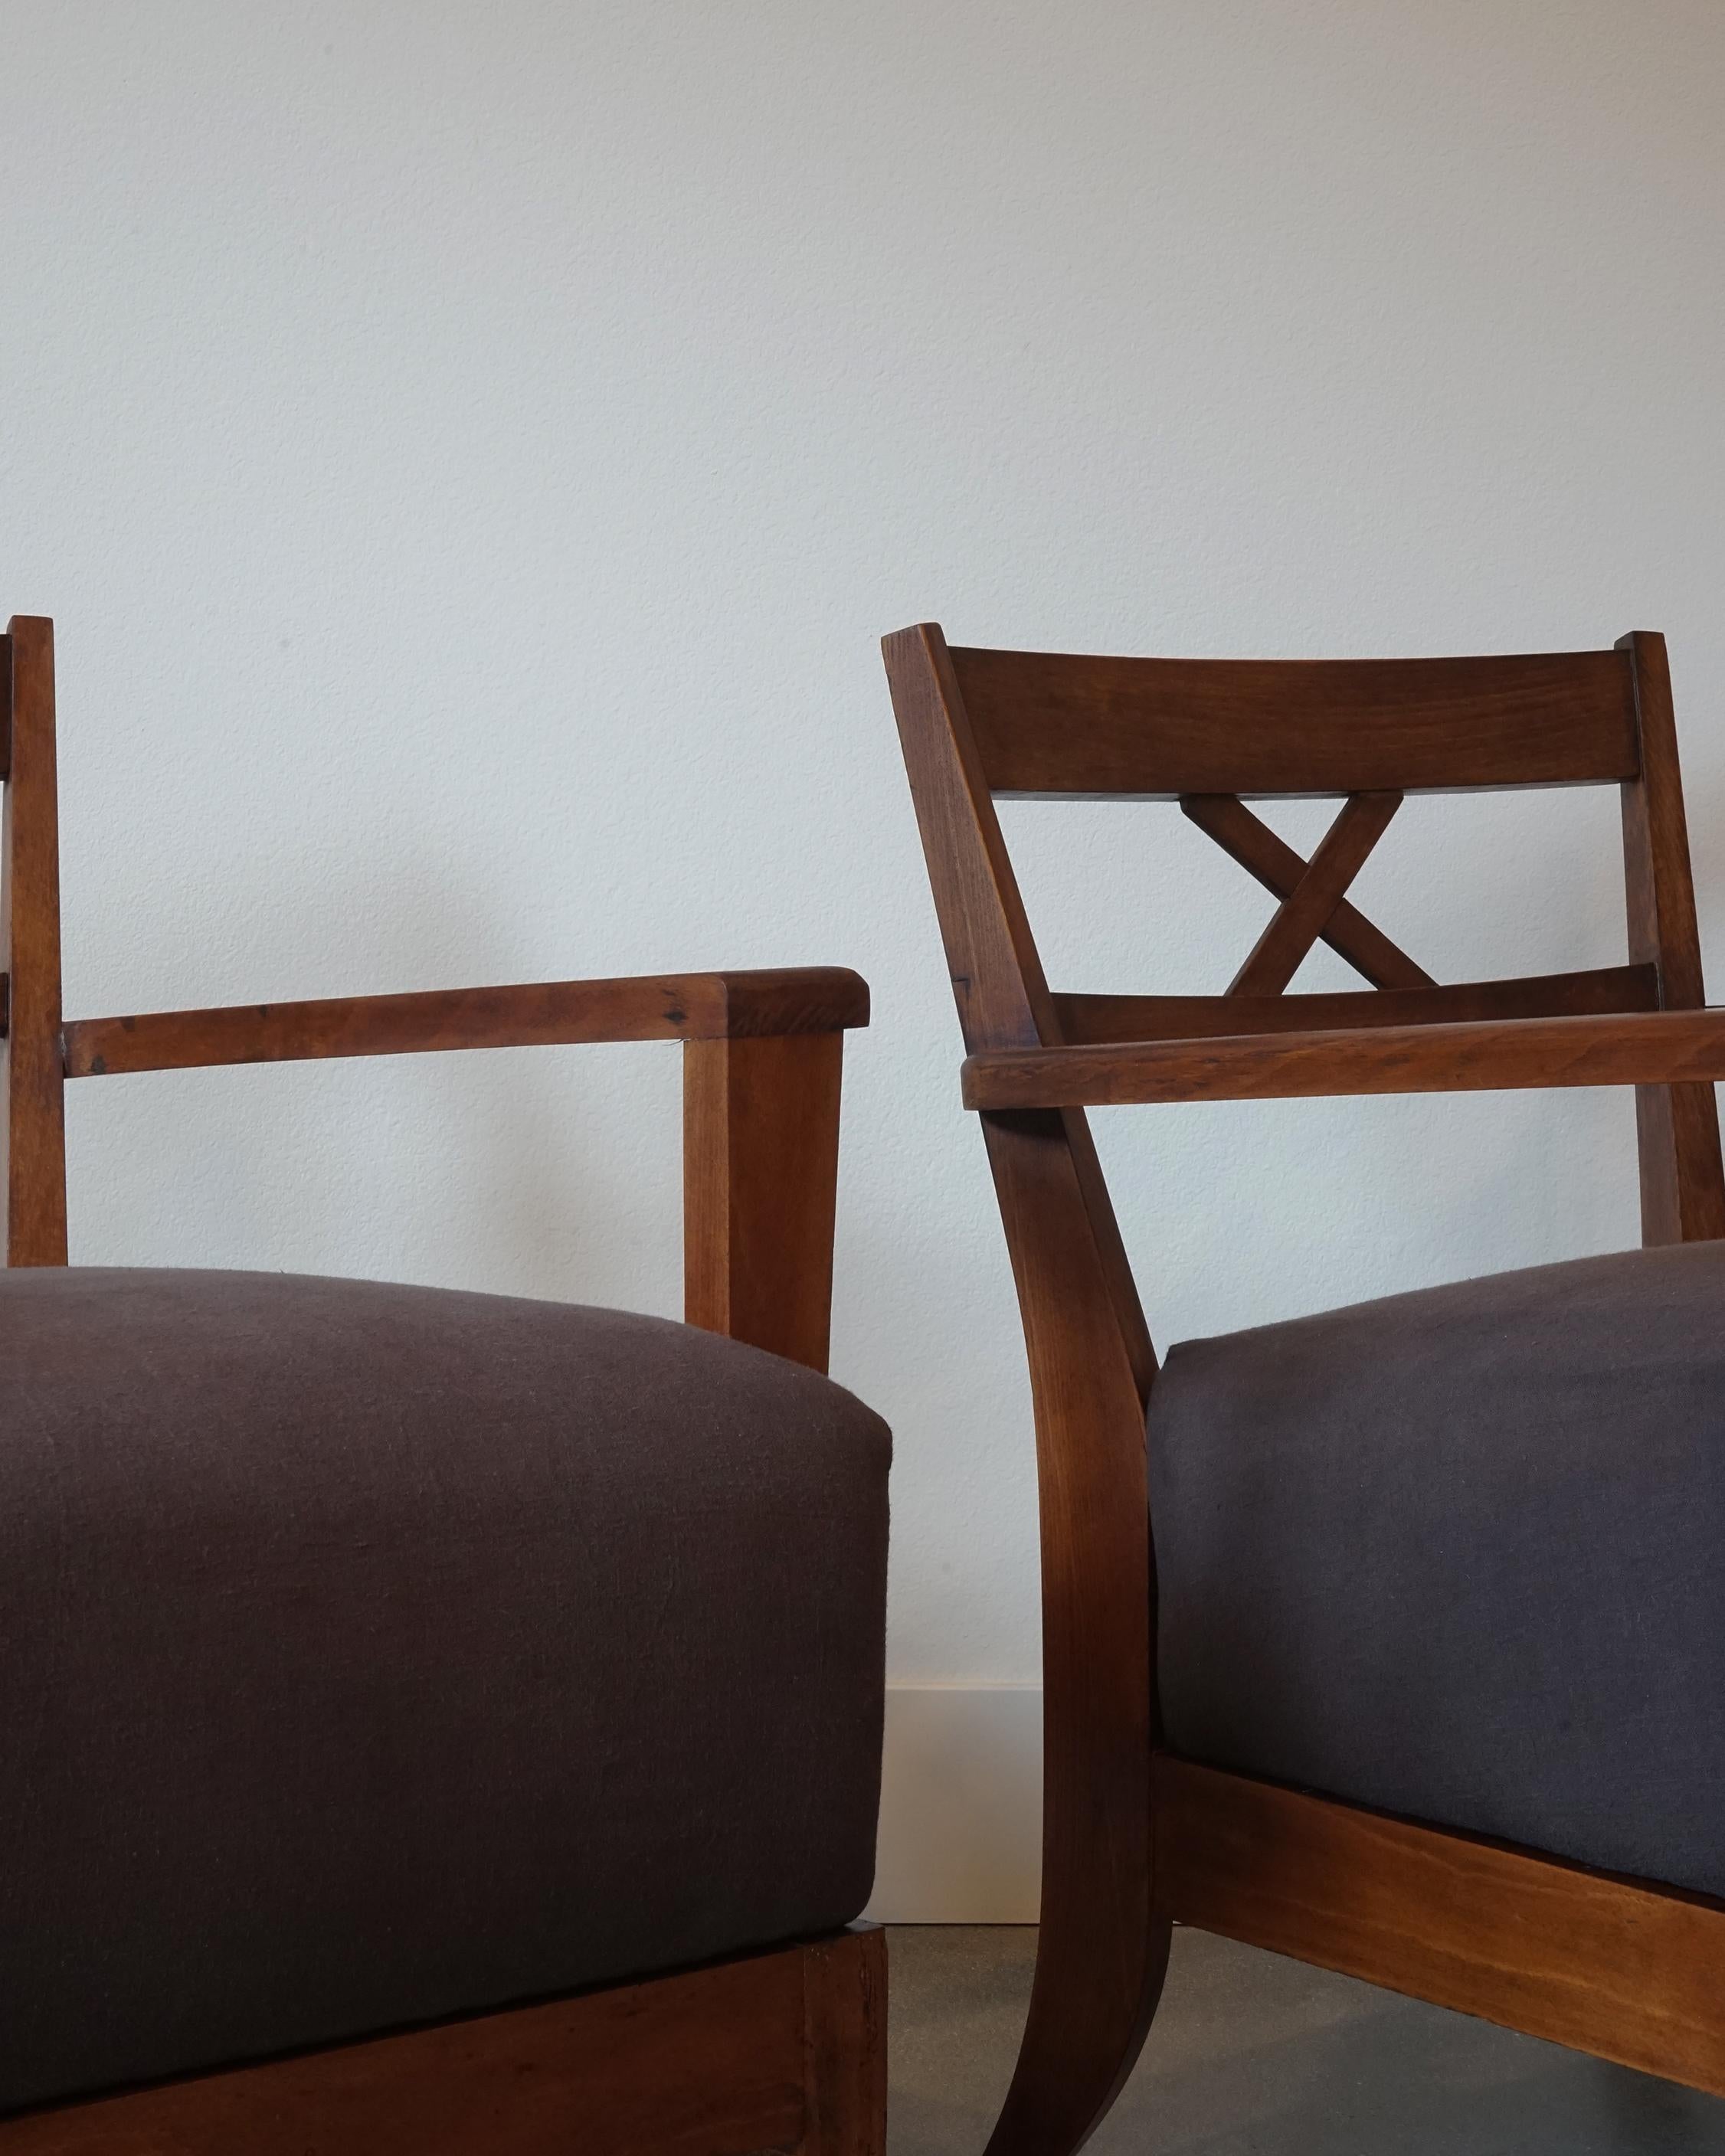 Vintage French Modernist Oak Lounge Chairs, 1940's, Belgian Linen Upholstery, 2 For Sale 2